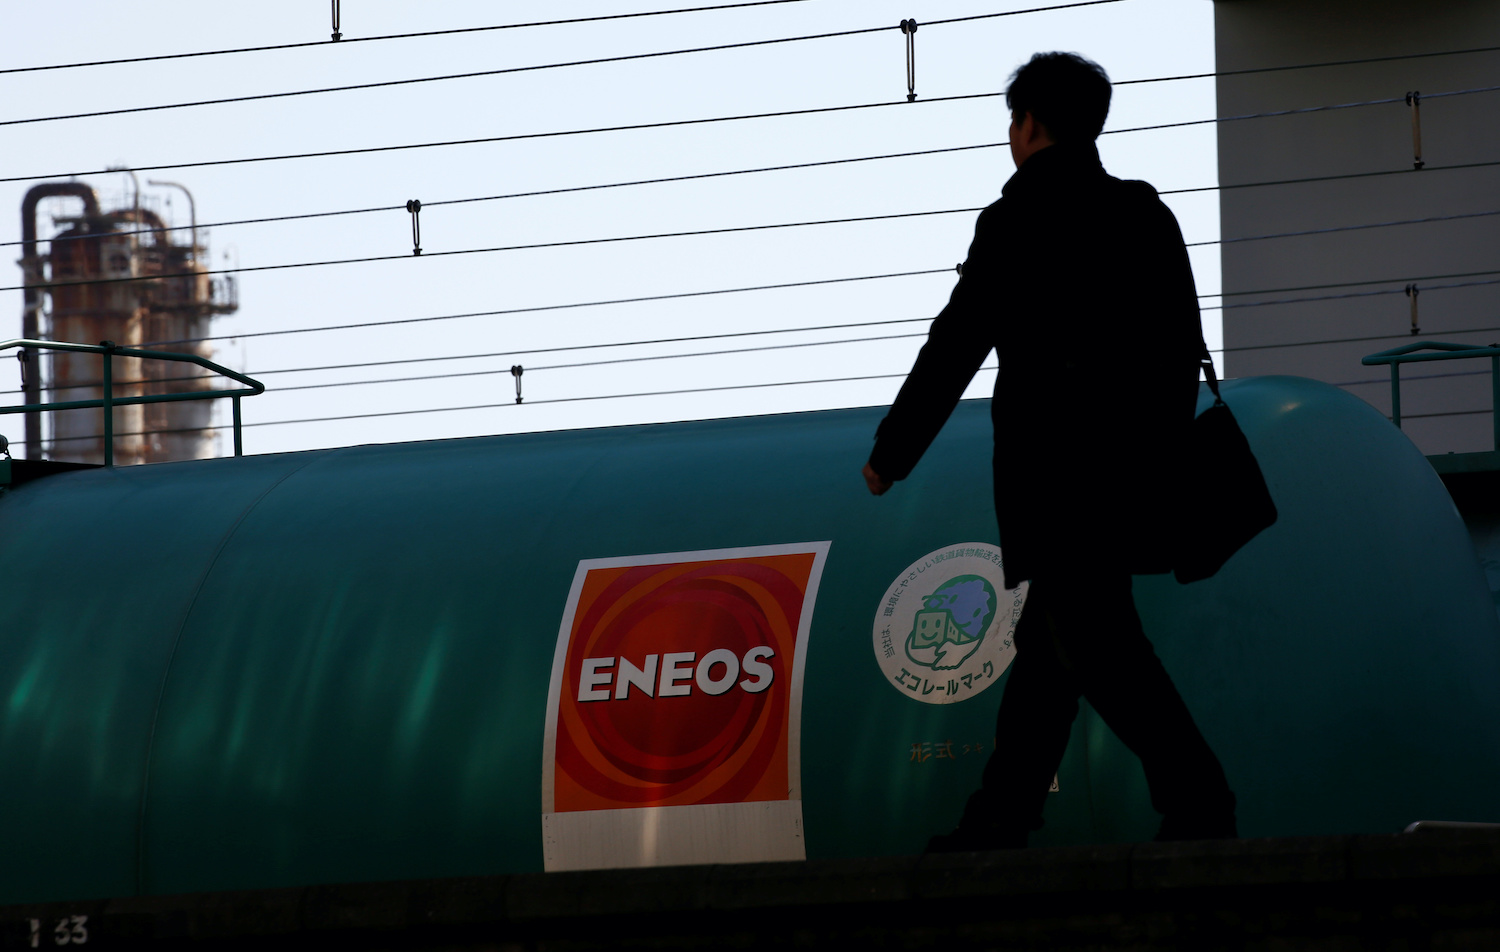 Eneos To Buy Japan Renewable Energy For $1.8bn: Nikkei